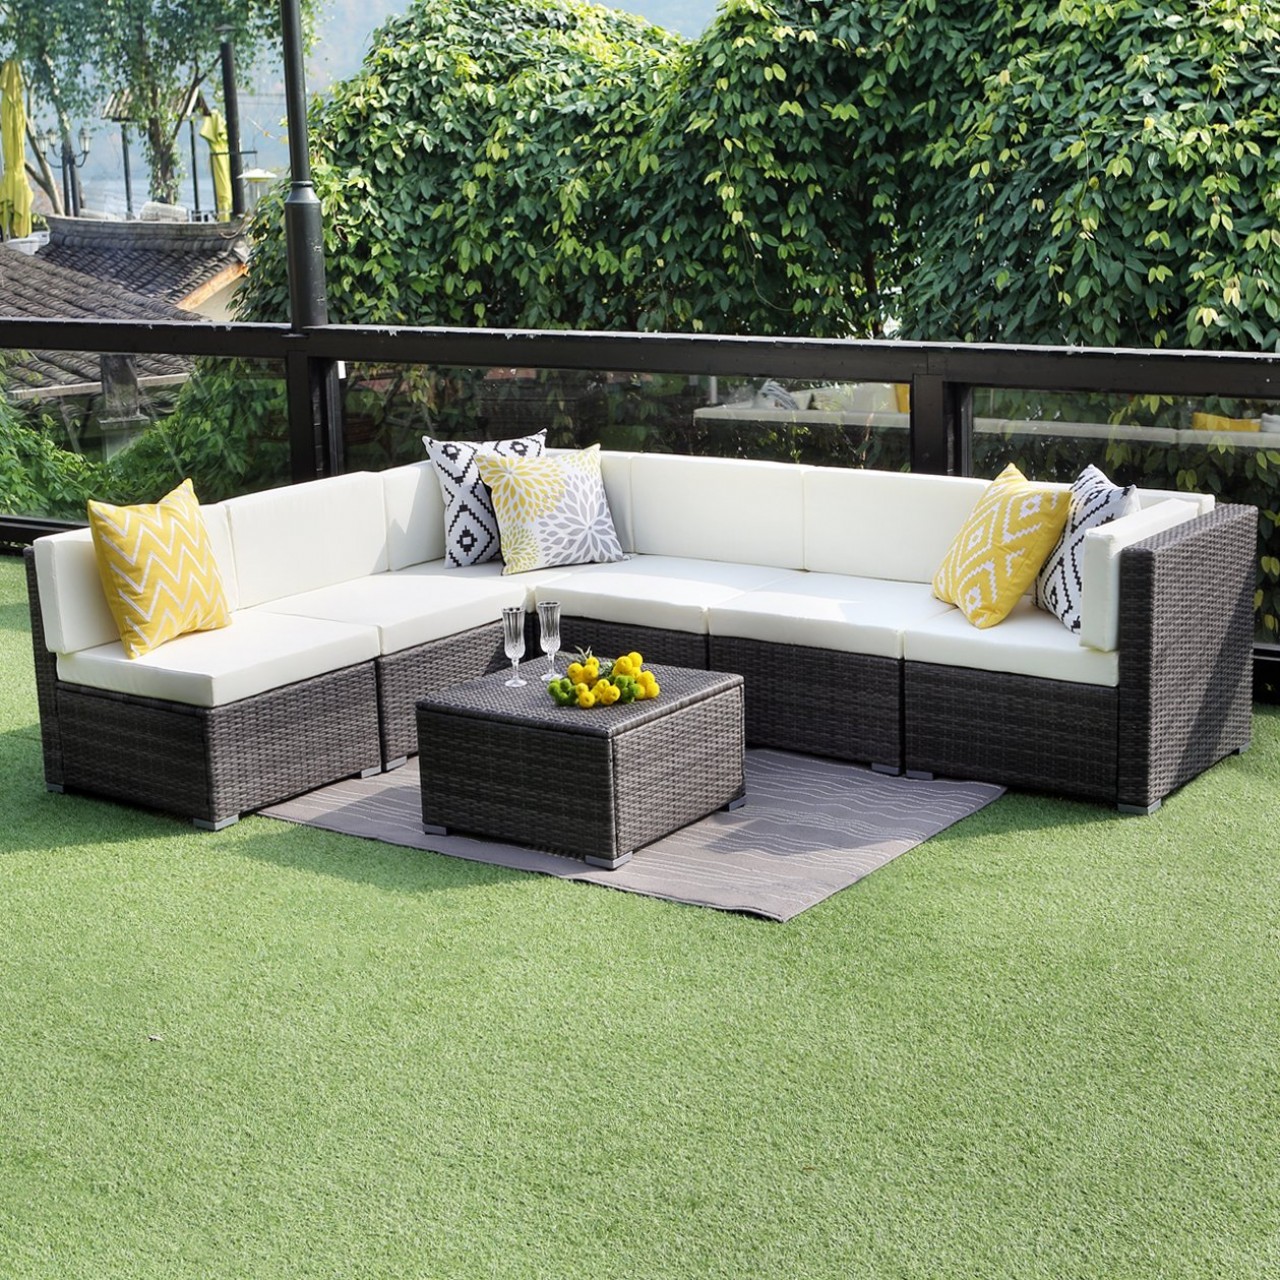 Outdoor Sectional Sofa Seating with Ottoman and Table, All Weather Grey Wicker